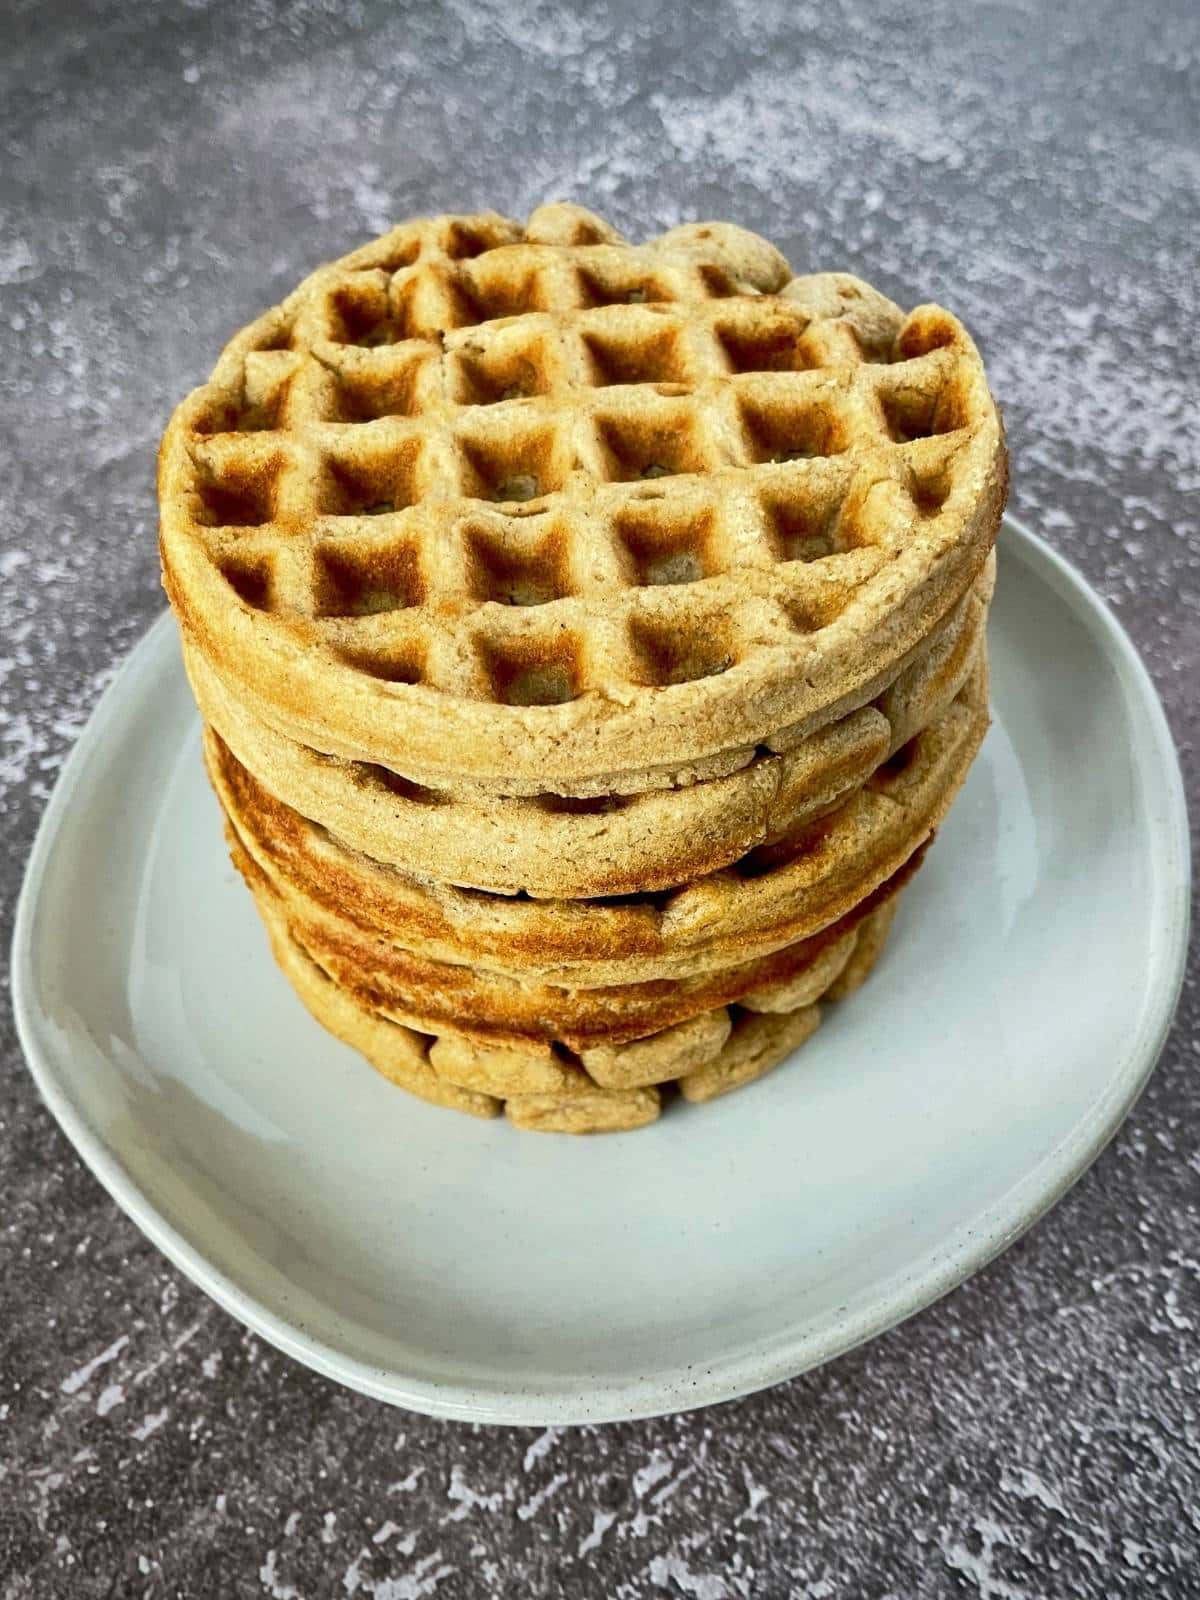 Stack of cooked waffles on a plate.